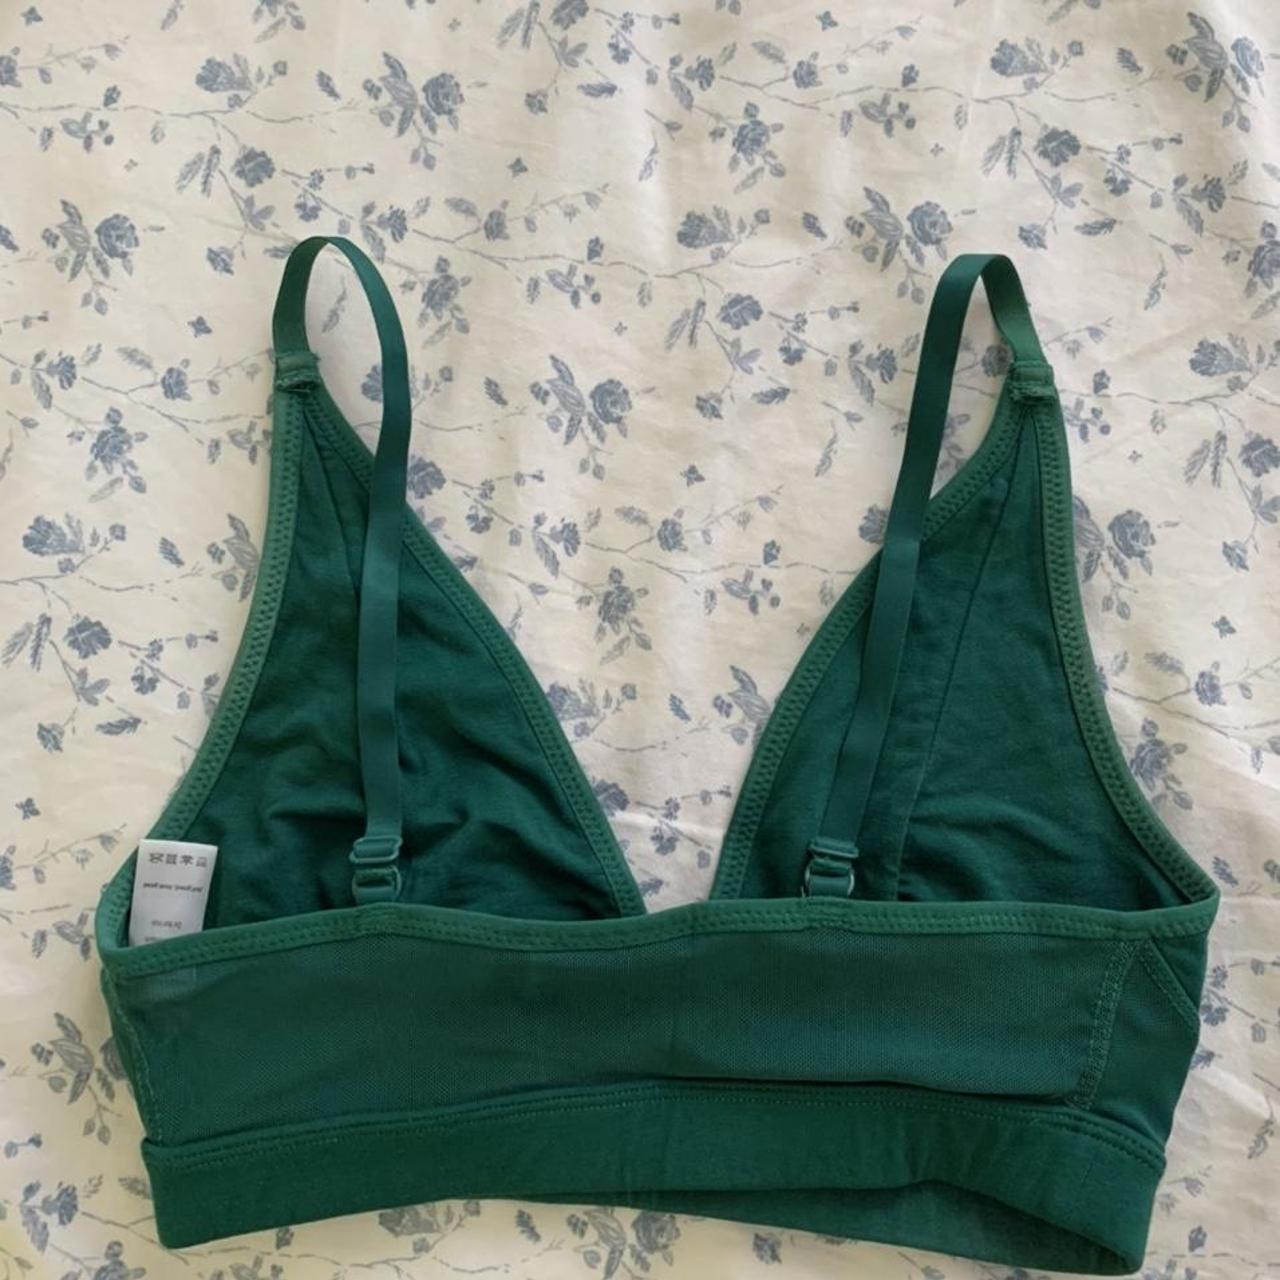 Product Image 2 - Green richer poorer xs bra!